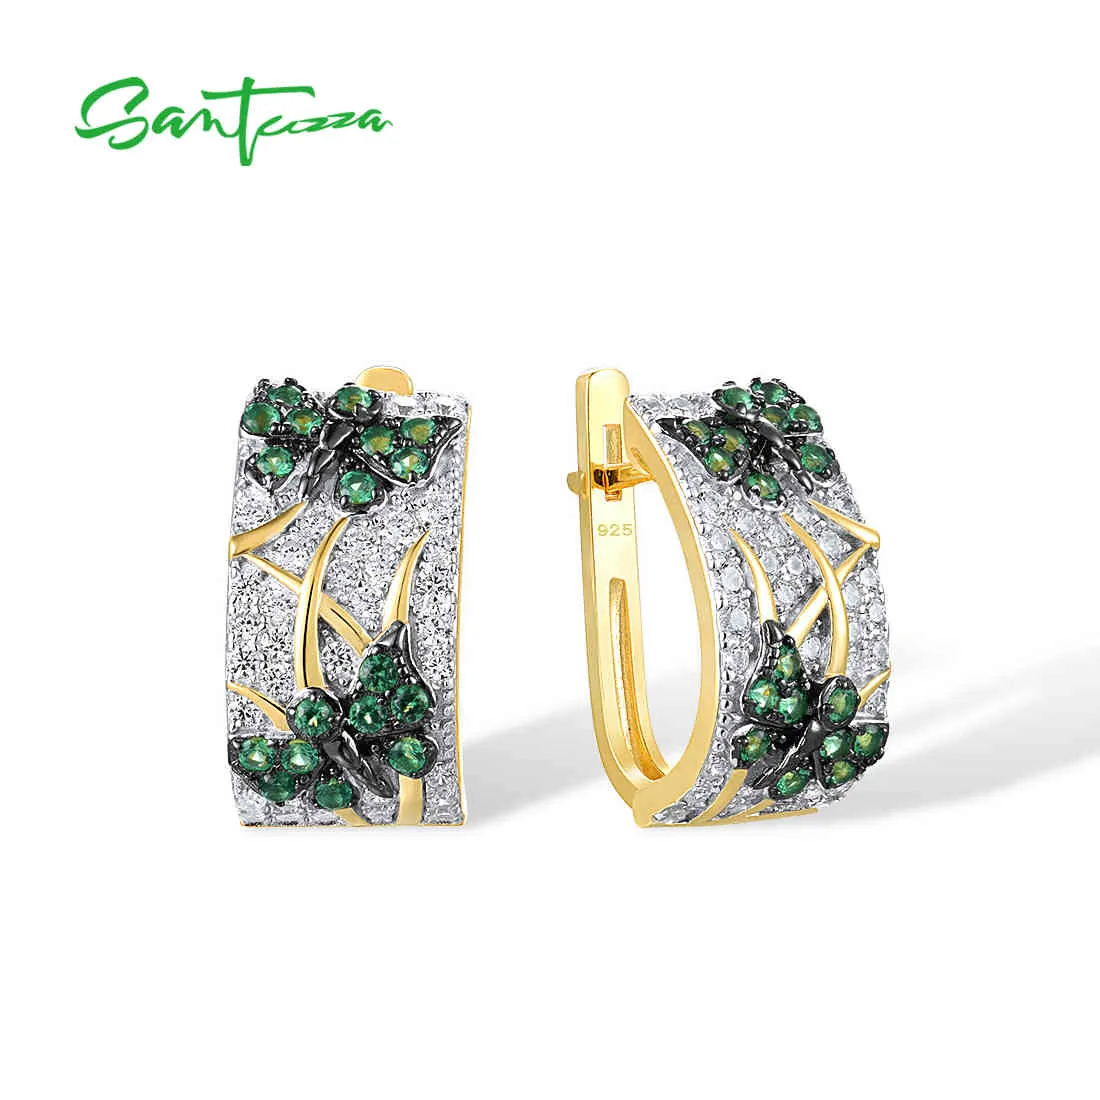 SANTUZZA Authentic 925 Sterling Silver Earrings For Women Green Spinel Butterfly Animal Gold Plated Wedding Gift Fine Jewelry